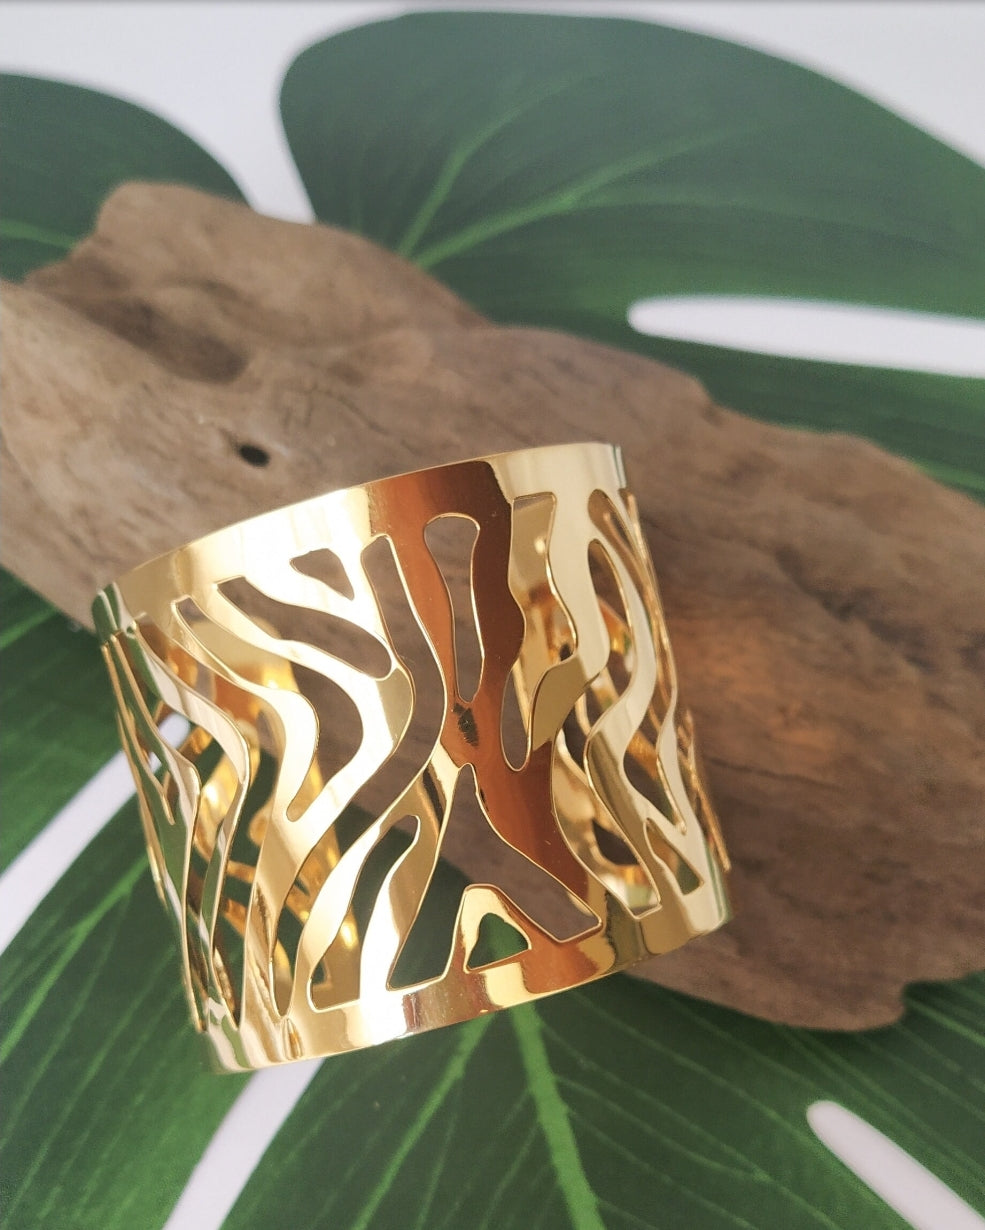 Gold Bracelet. For special occasions. Flourish Collection. Handmade by Ariadna Echenique. Gold plated